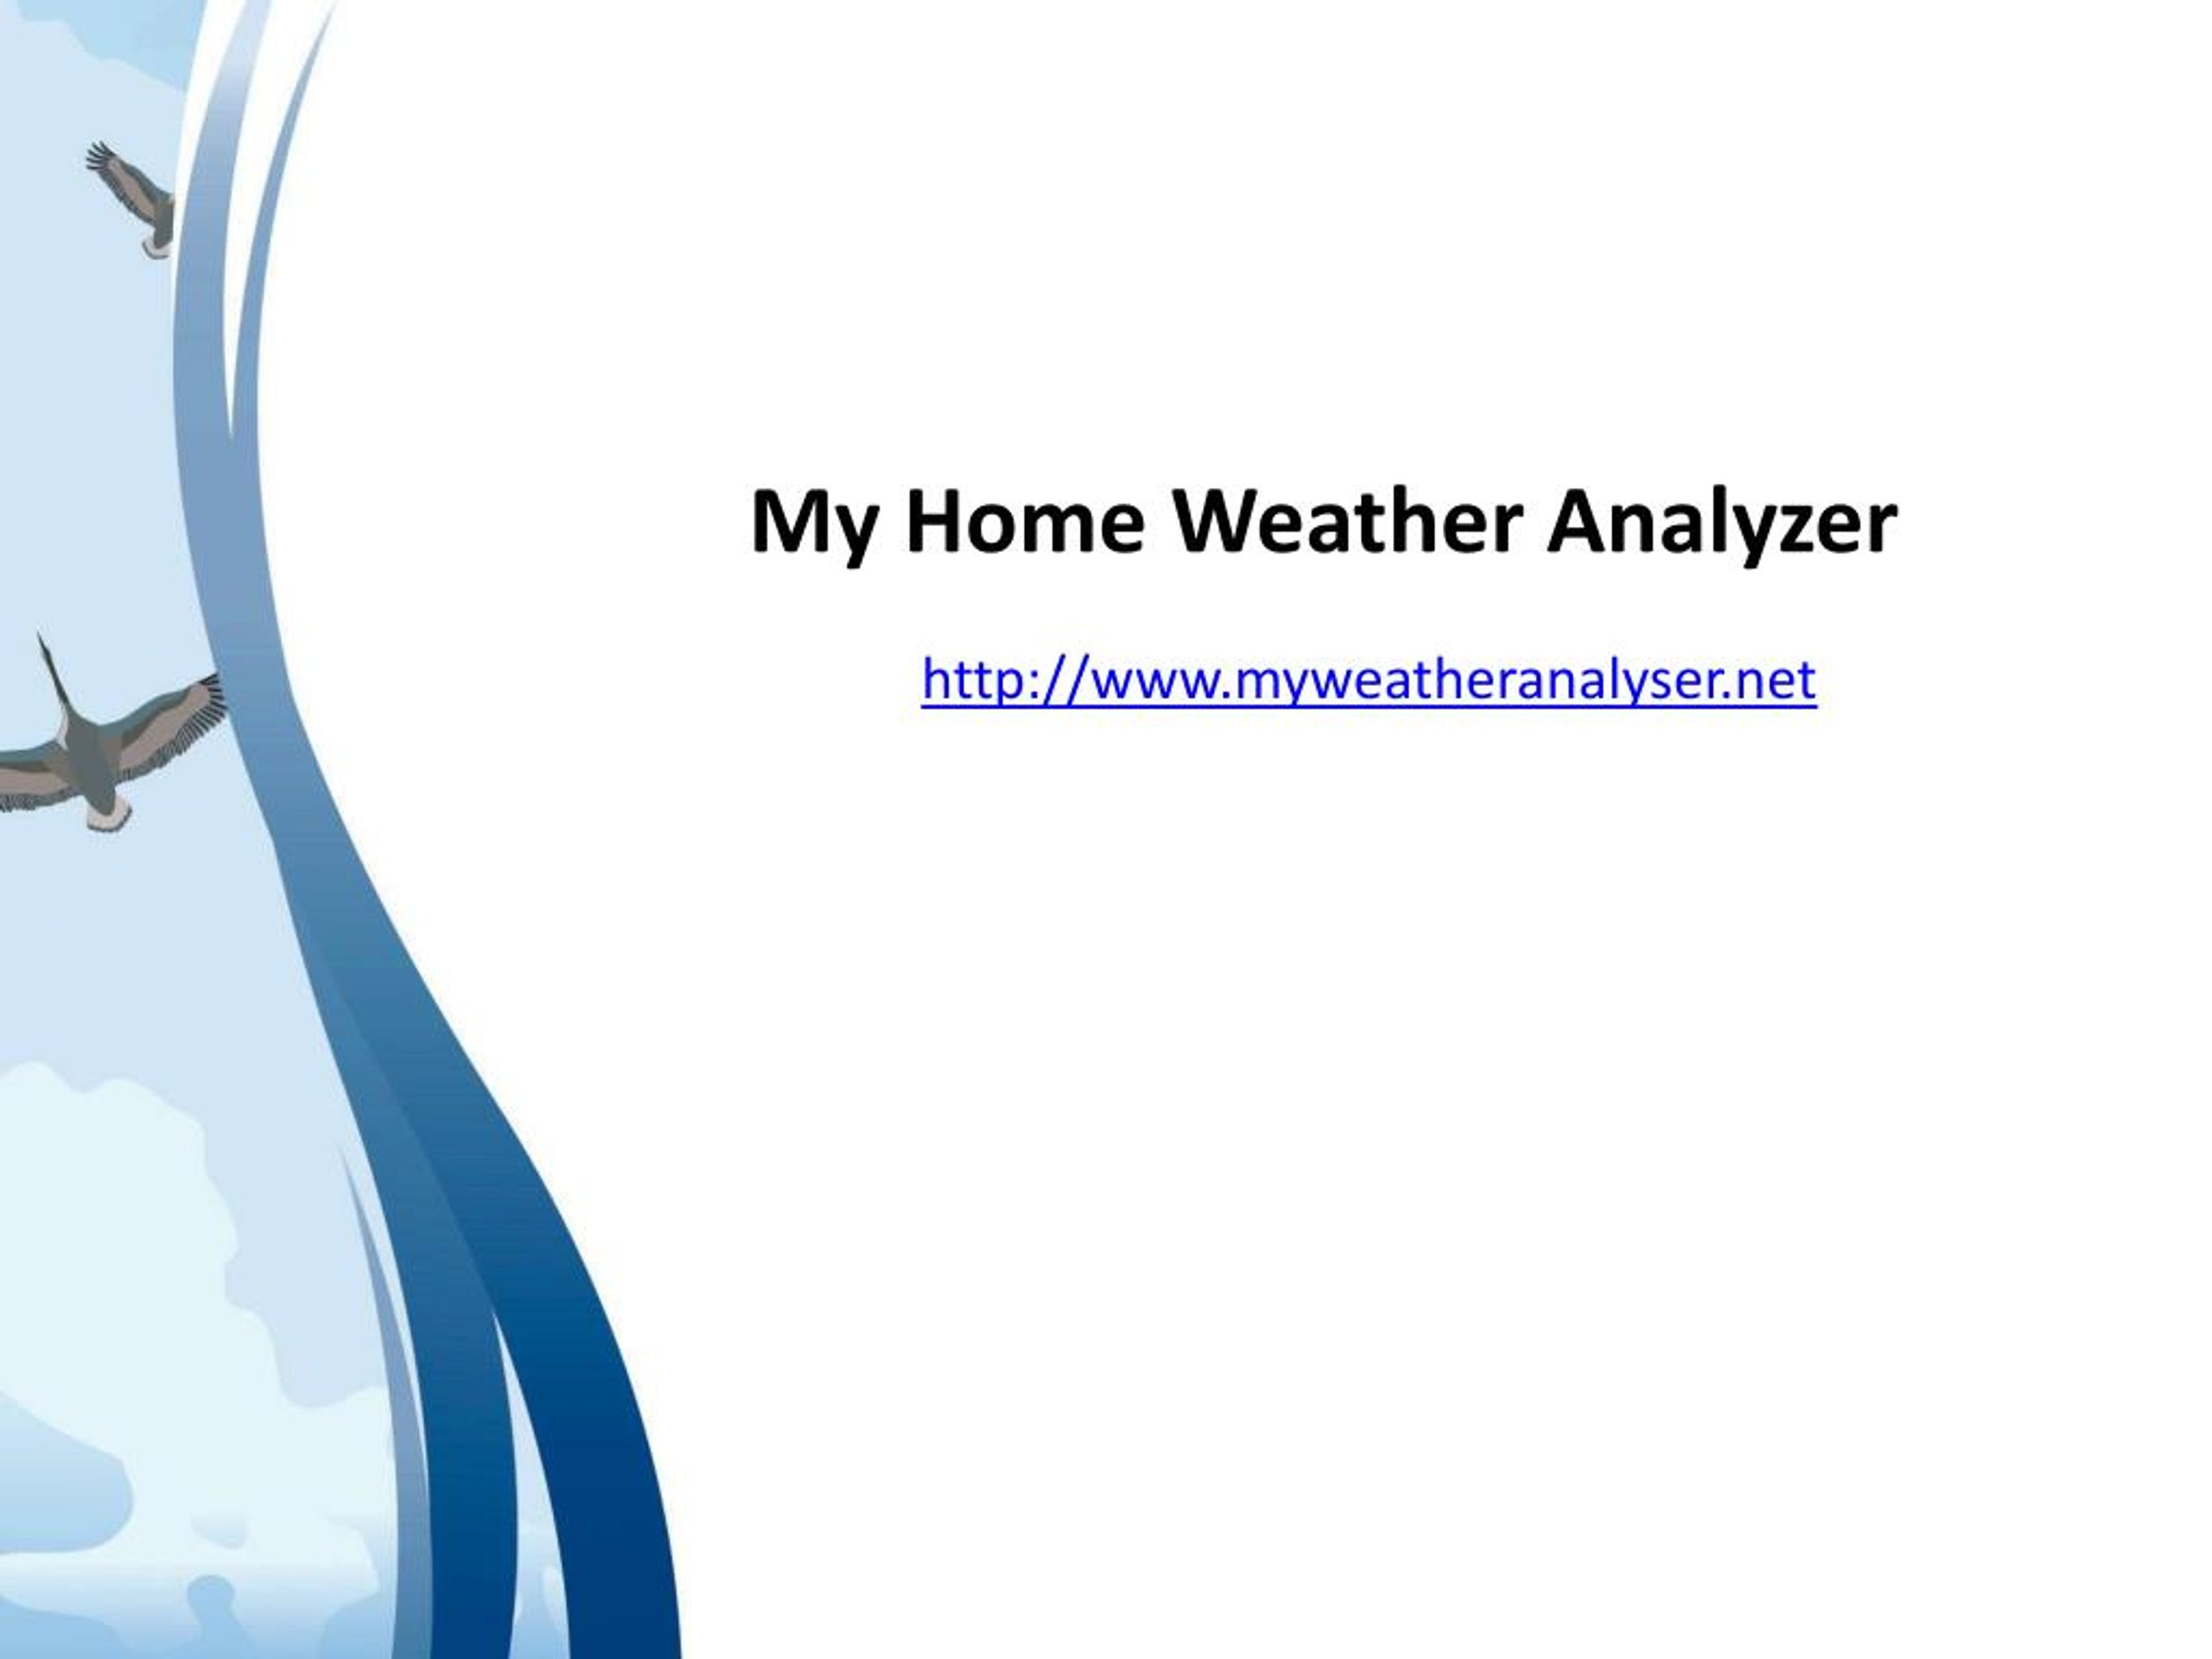 Ppt Get Exclusive Models Of Weather Station And Its Reviews